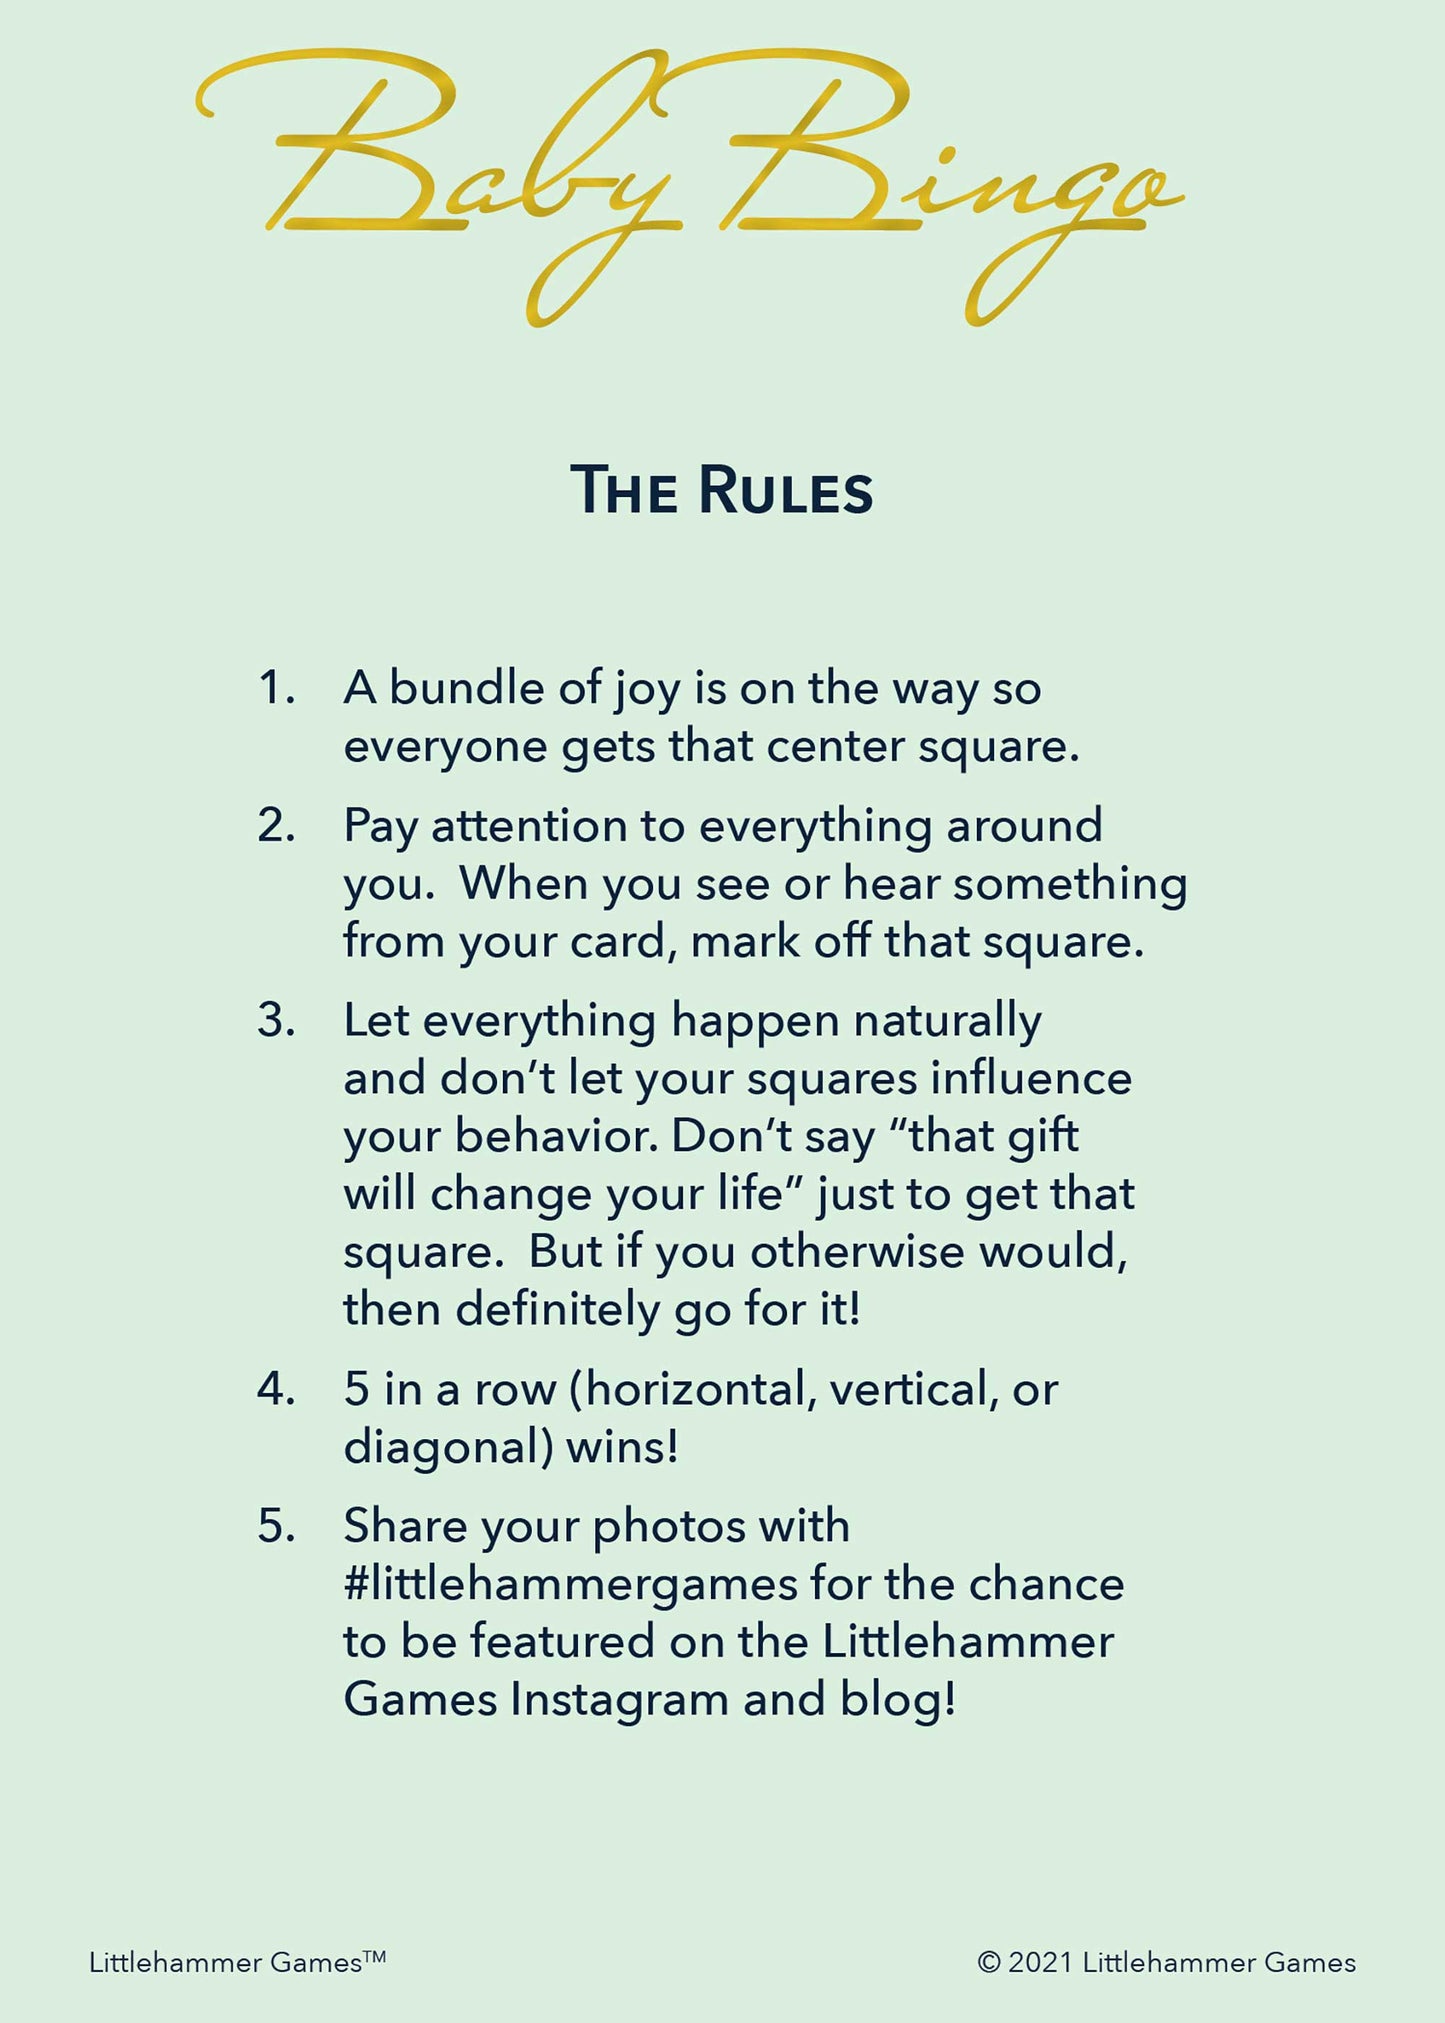 Baby Bingo rules card with gold text on a mint background